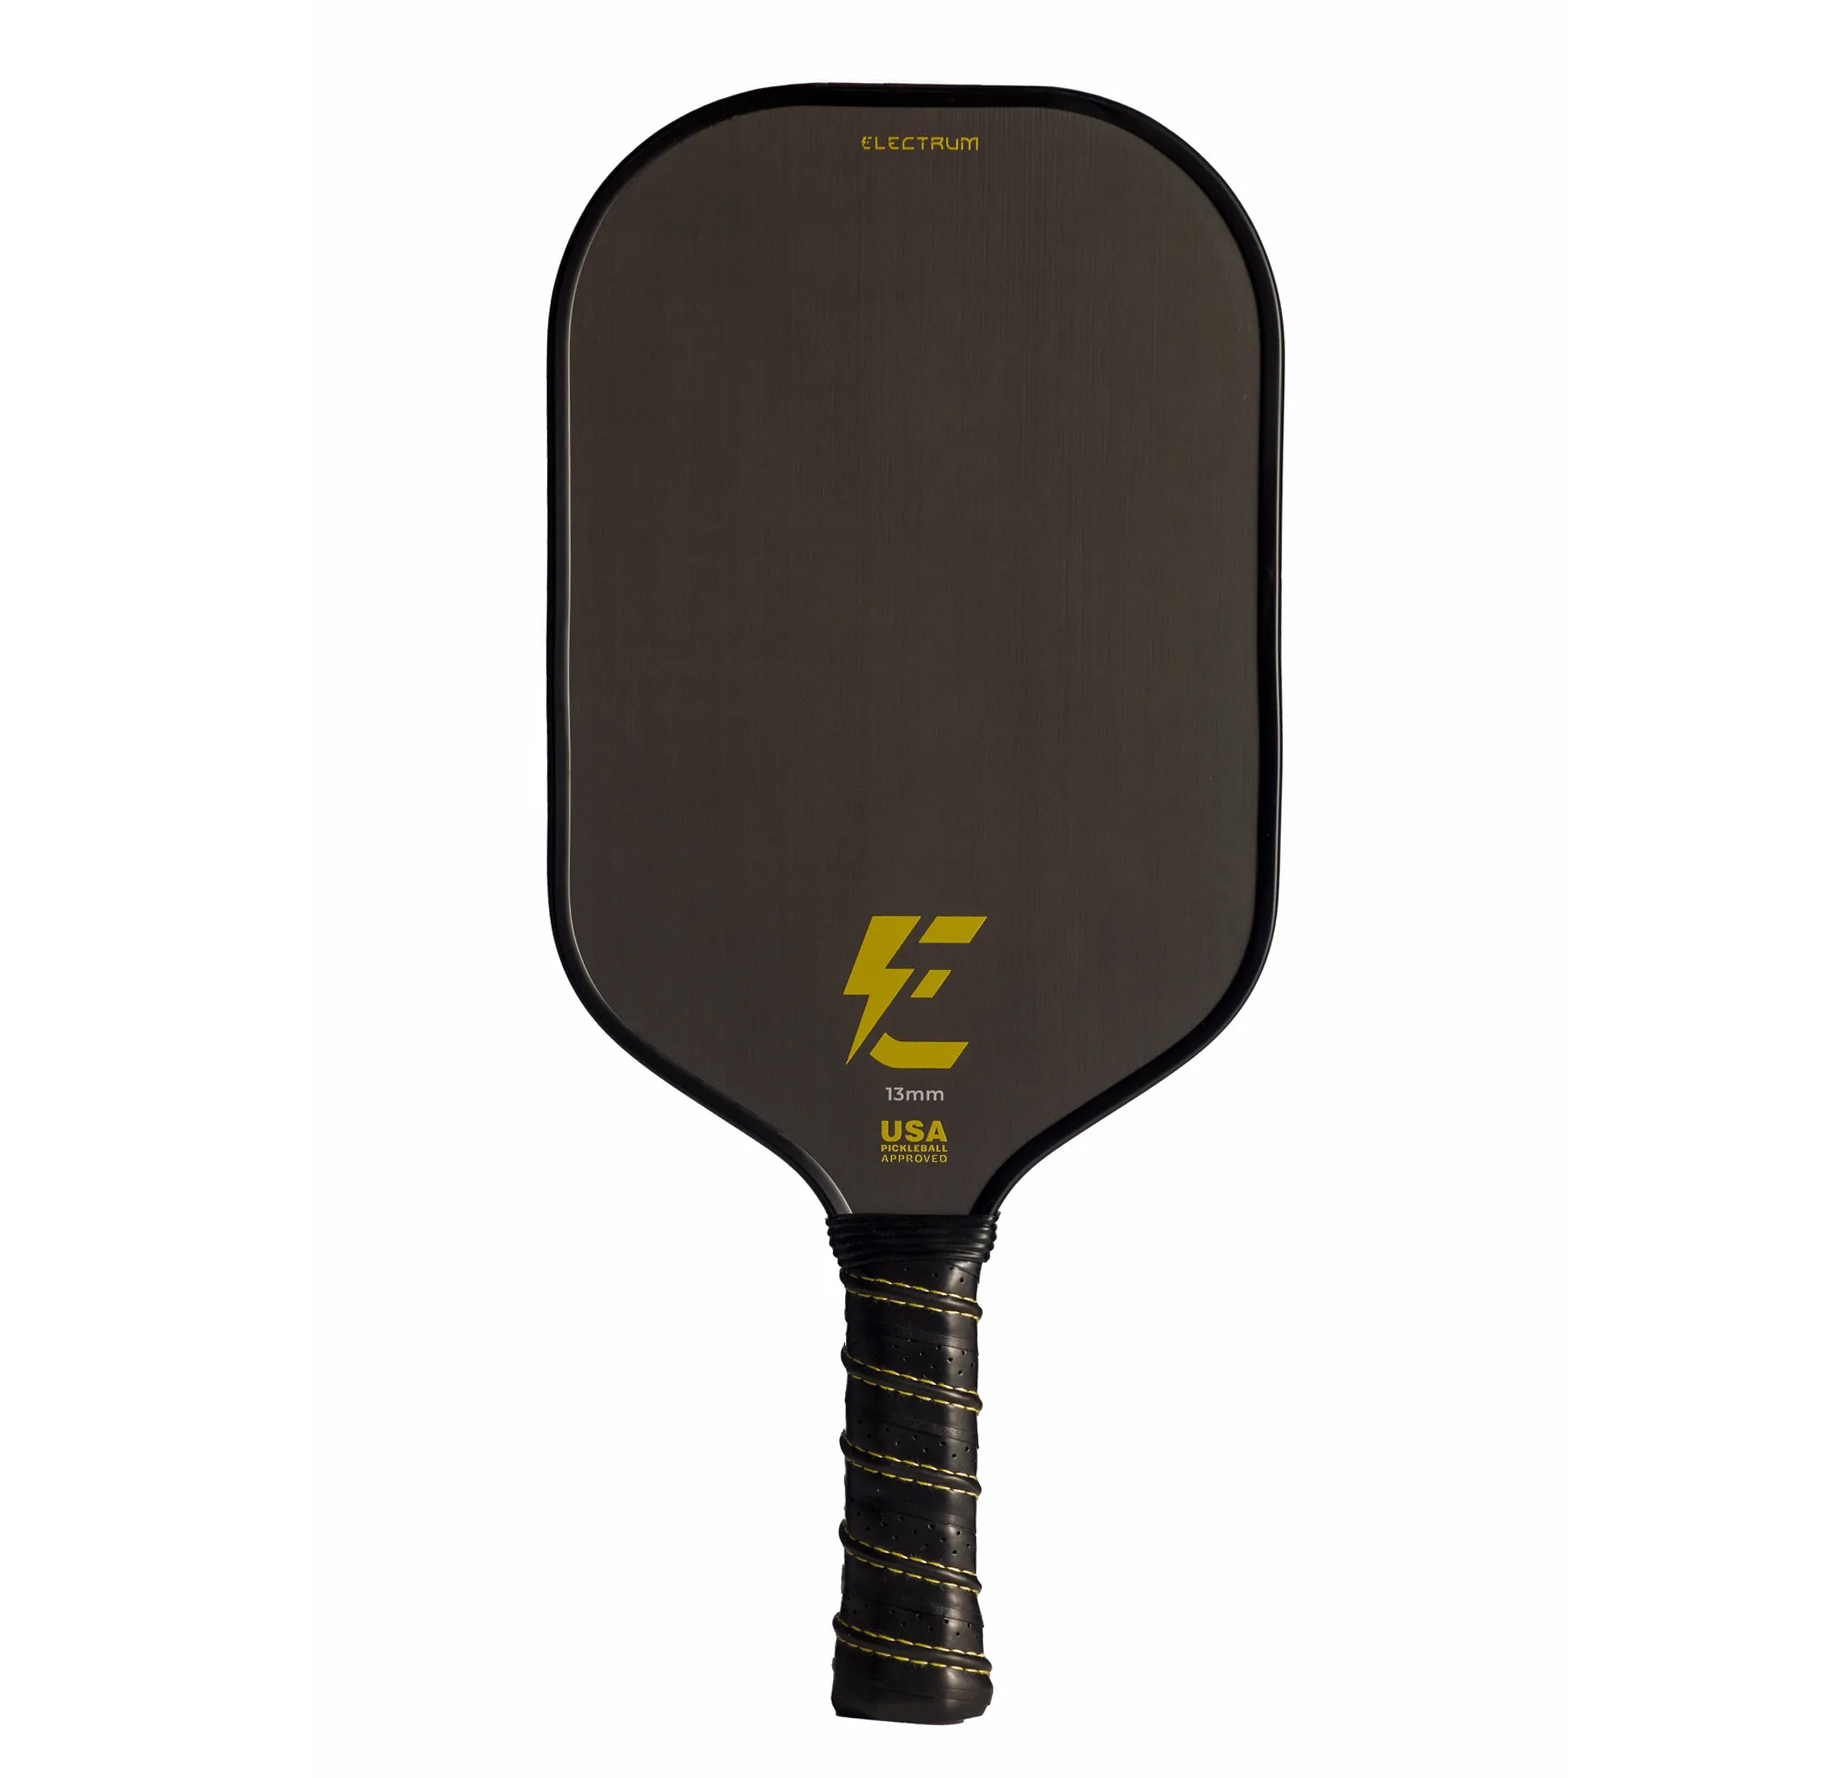 Electrum Pro - Paddle Review | Pickleball Union